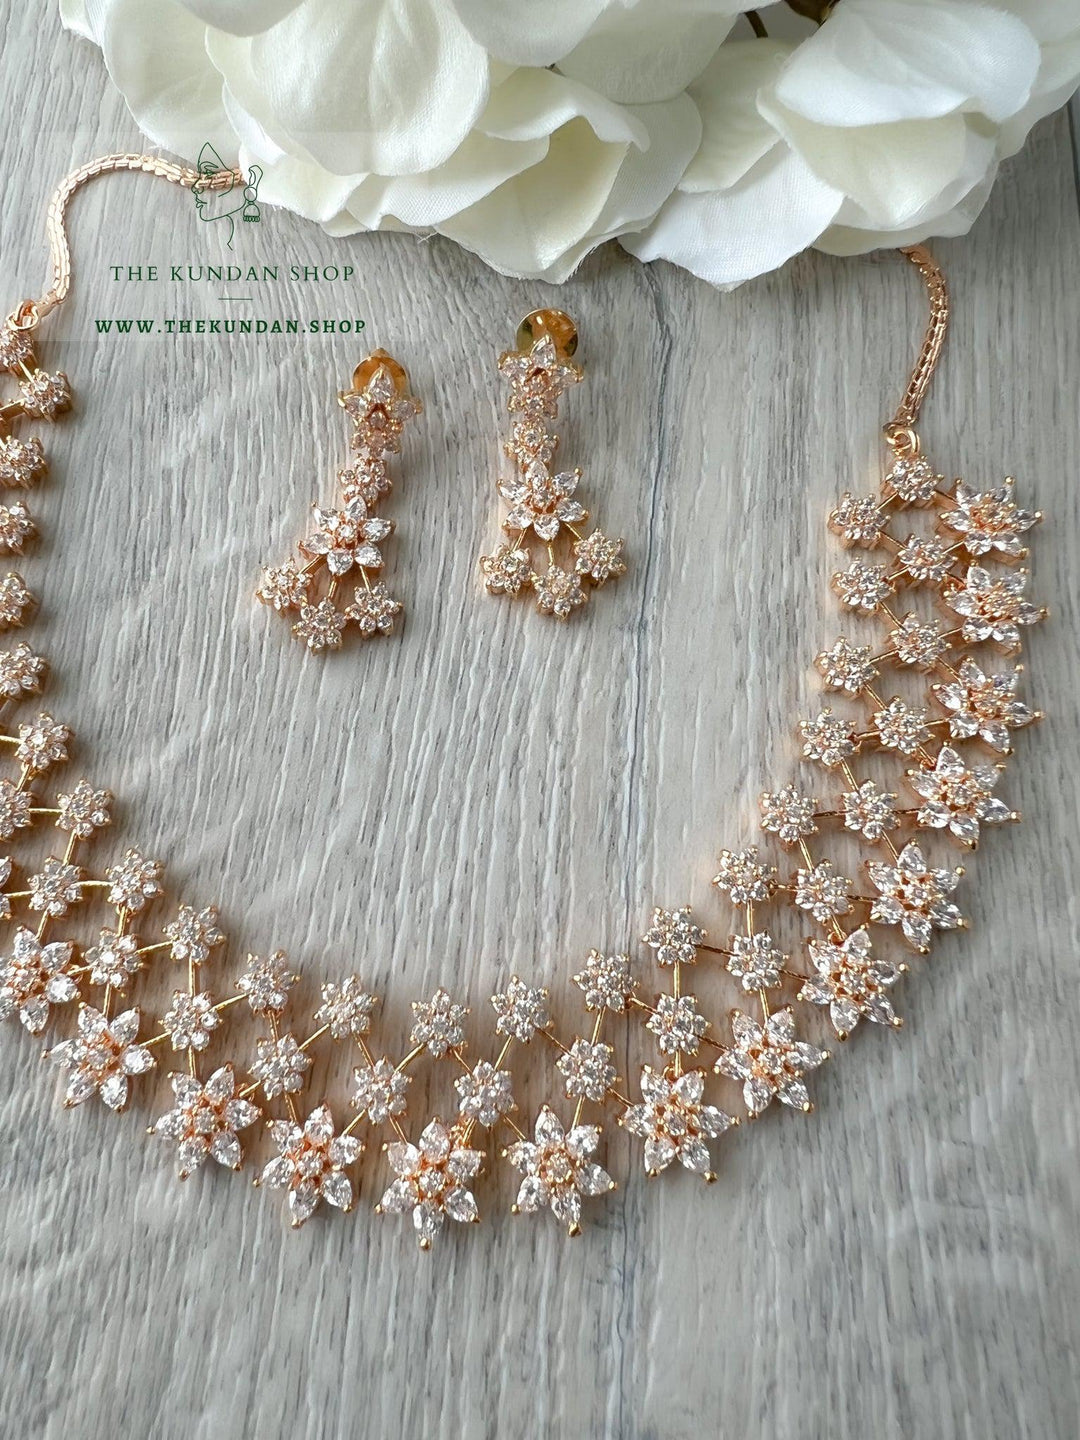 Undeniable 2.0 in Gold Necklace Sets THE KUNDAN SHOP 